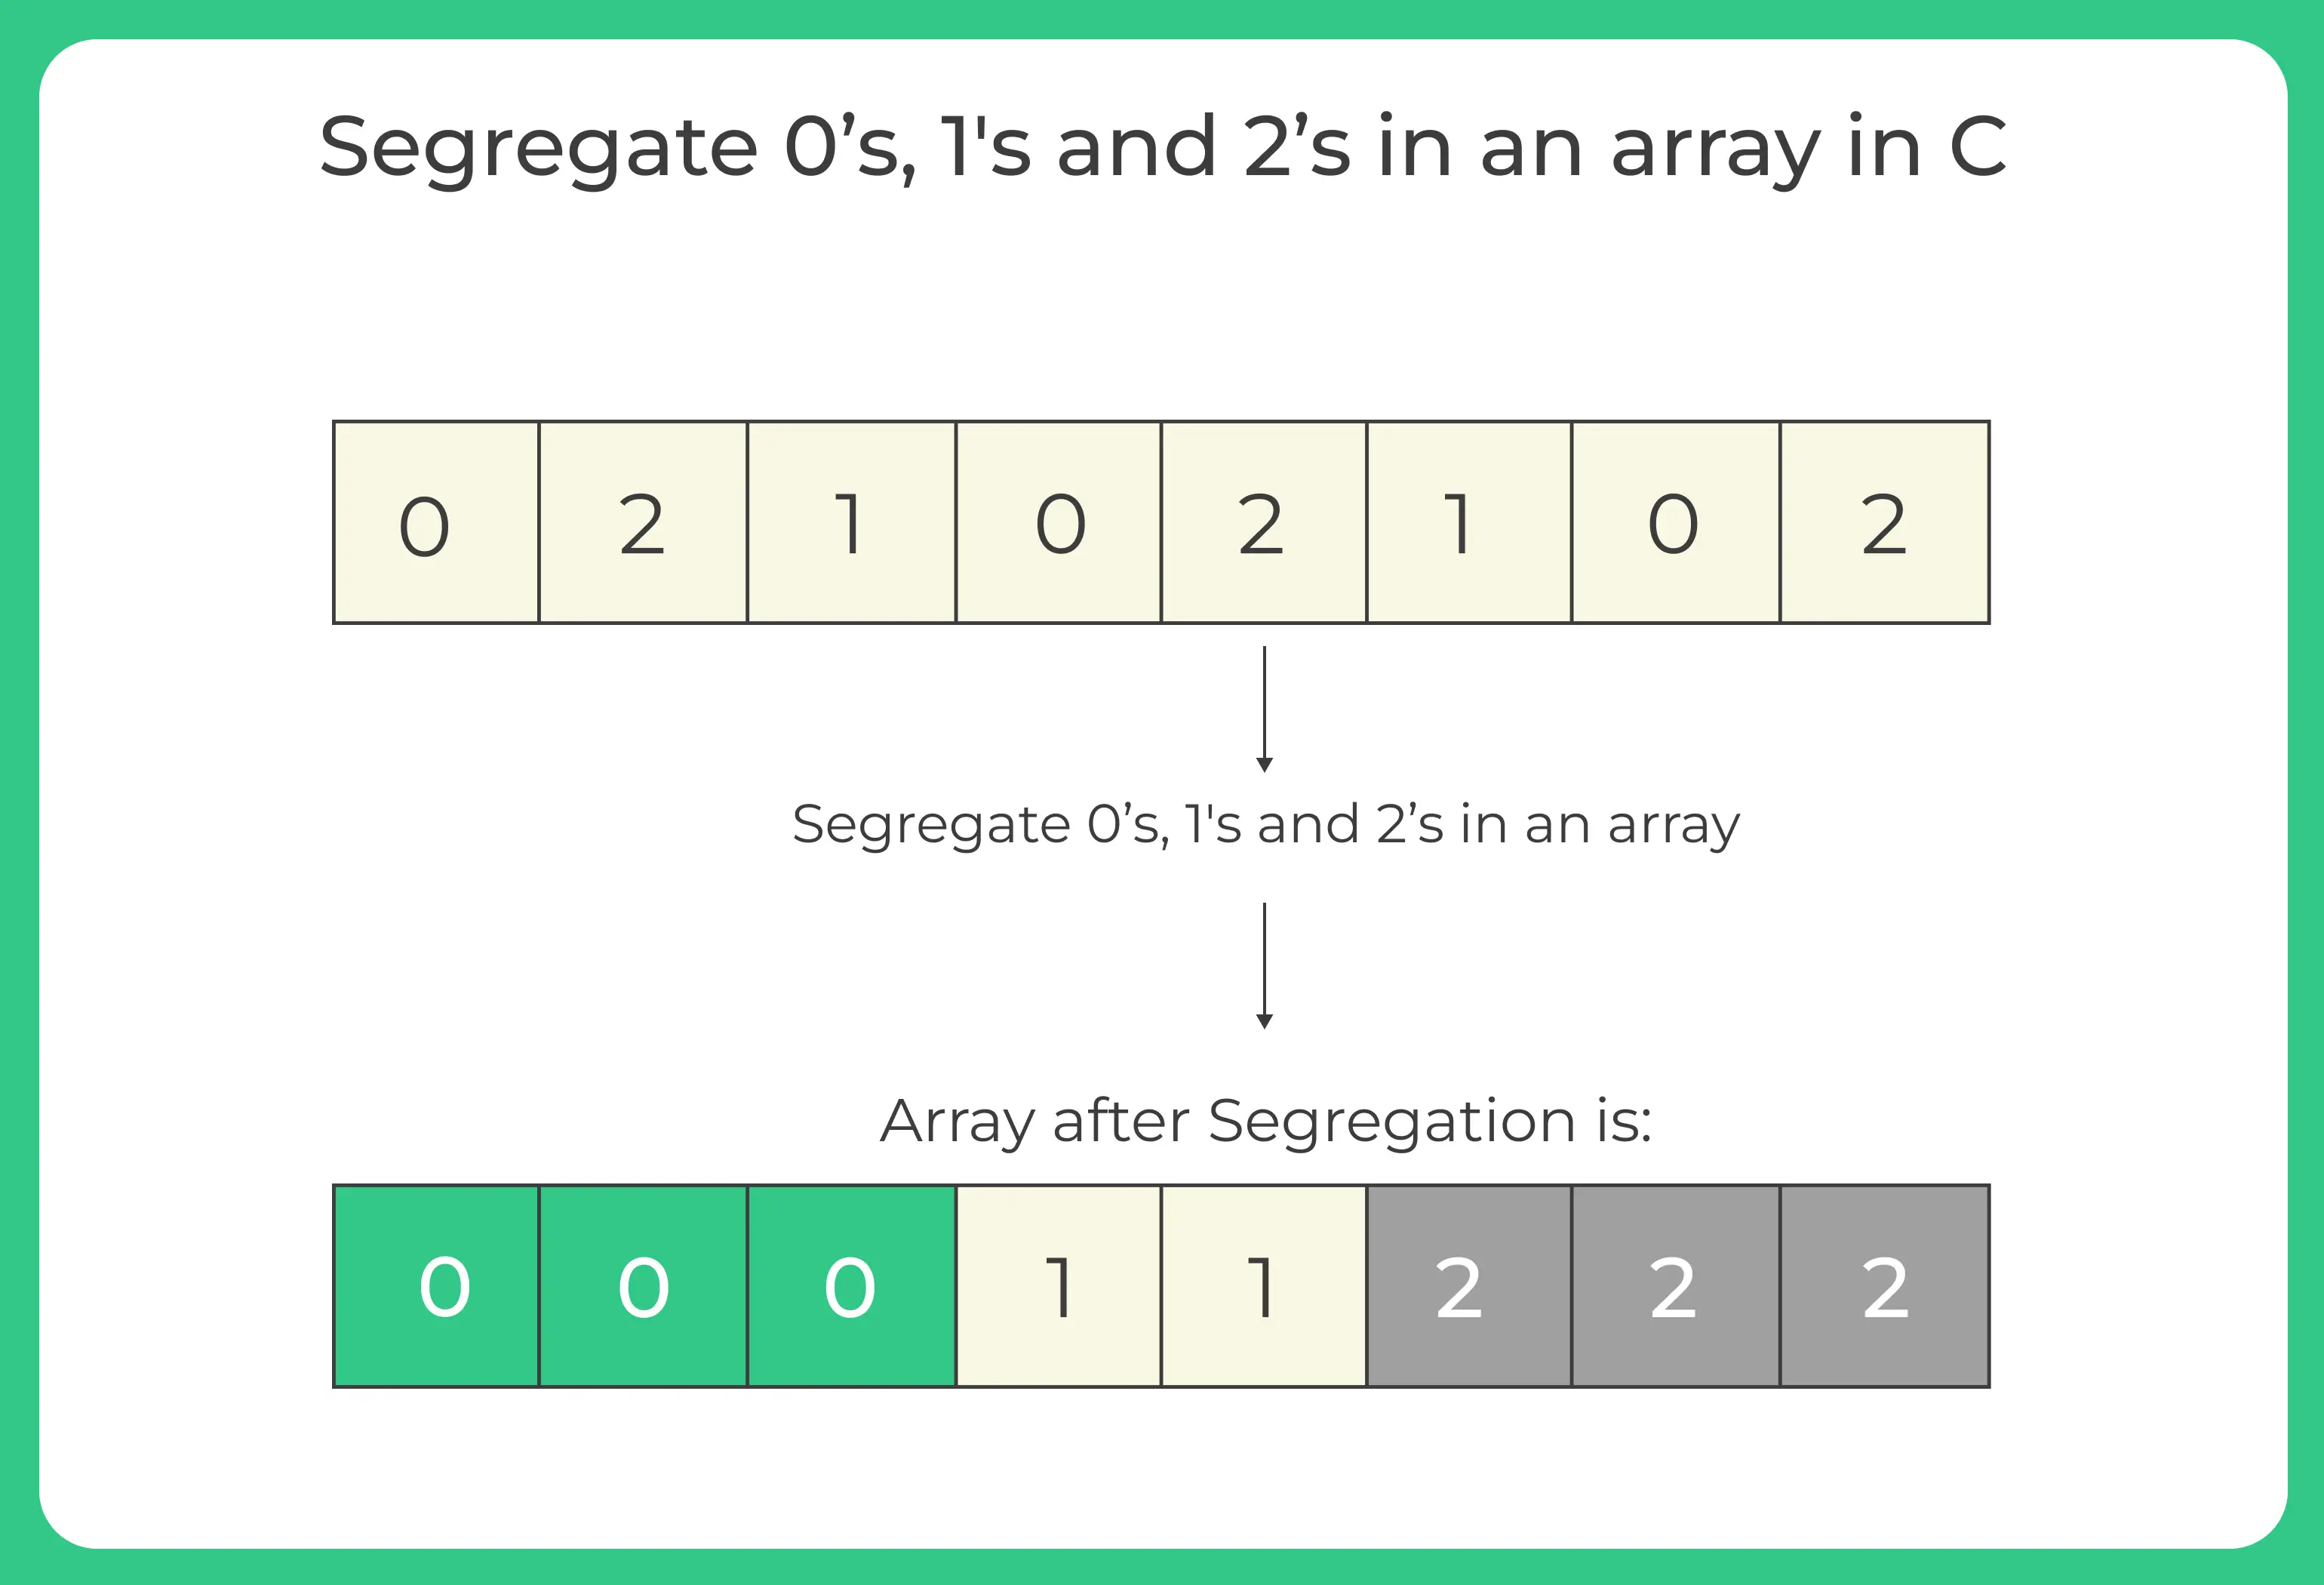 Segregate 0’s, 1's and 2’s in an array in C